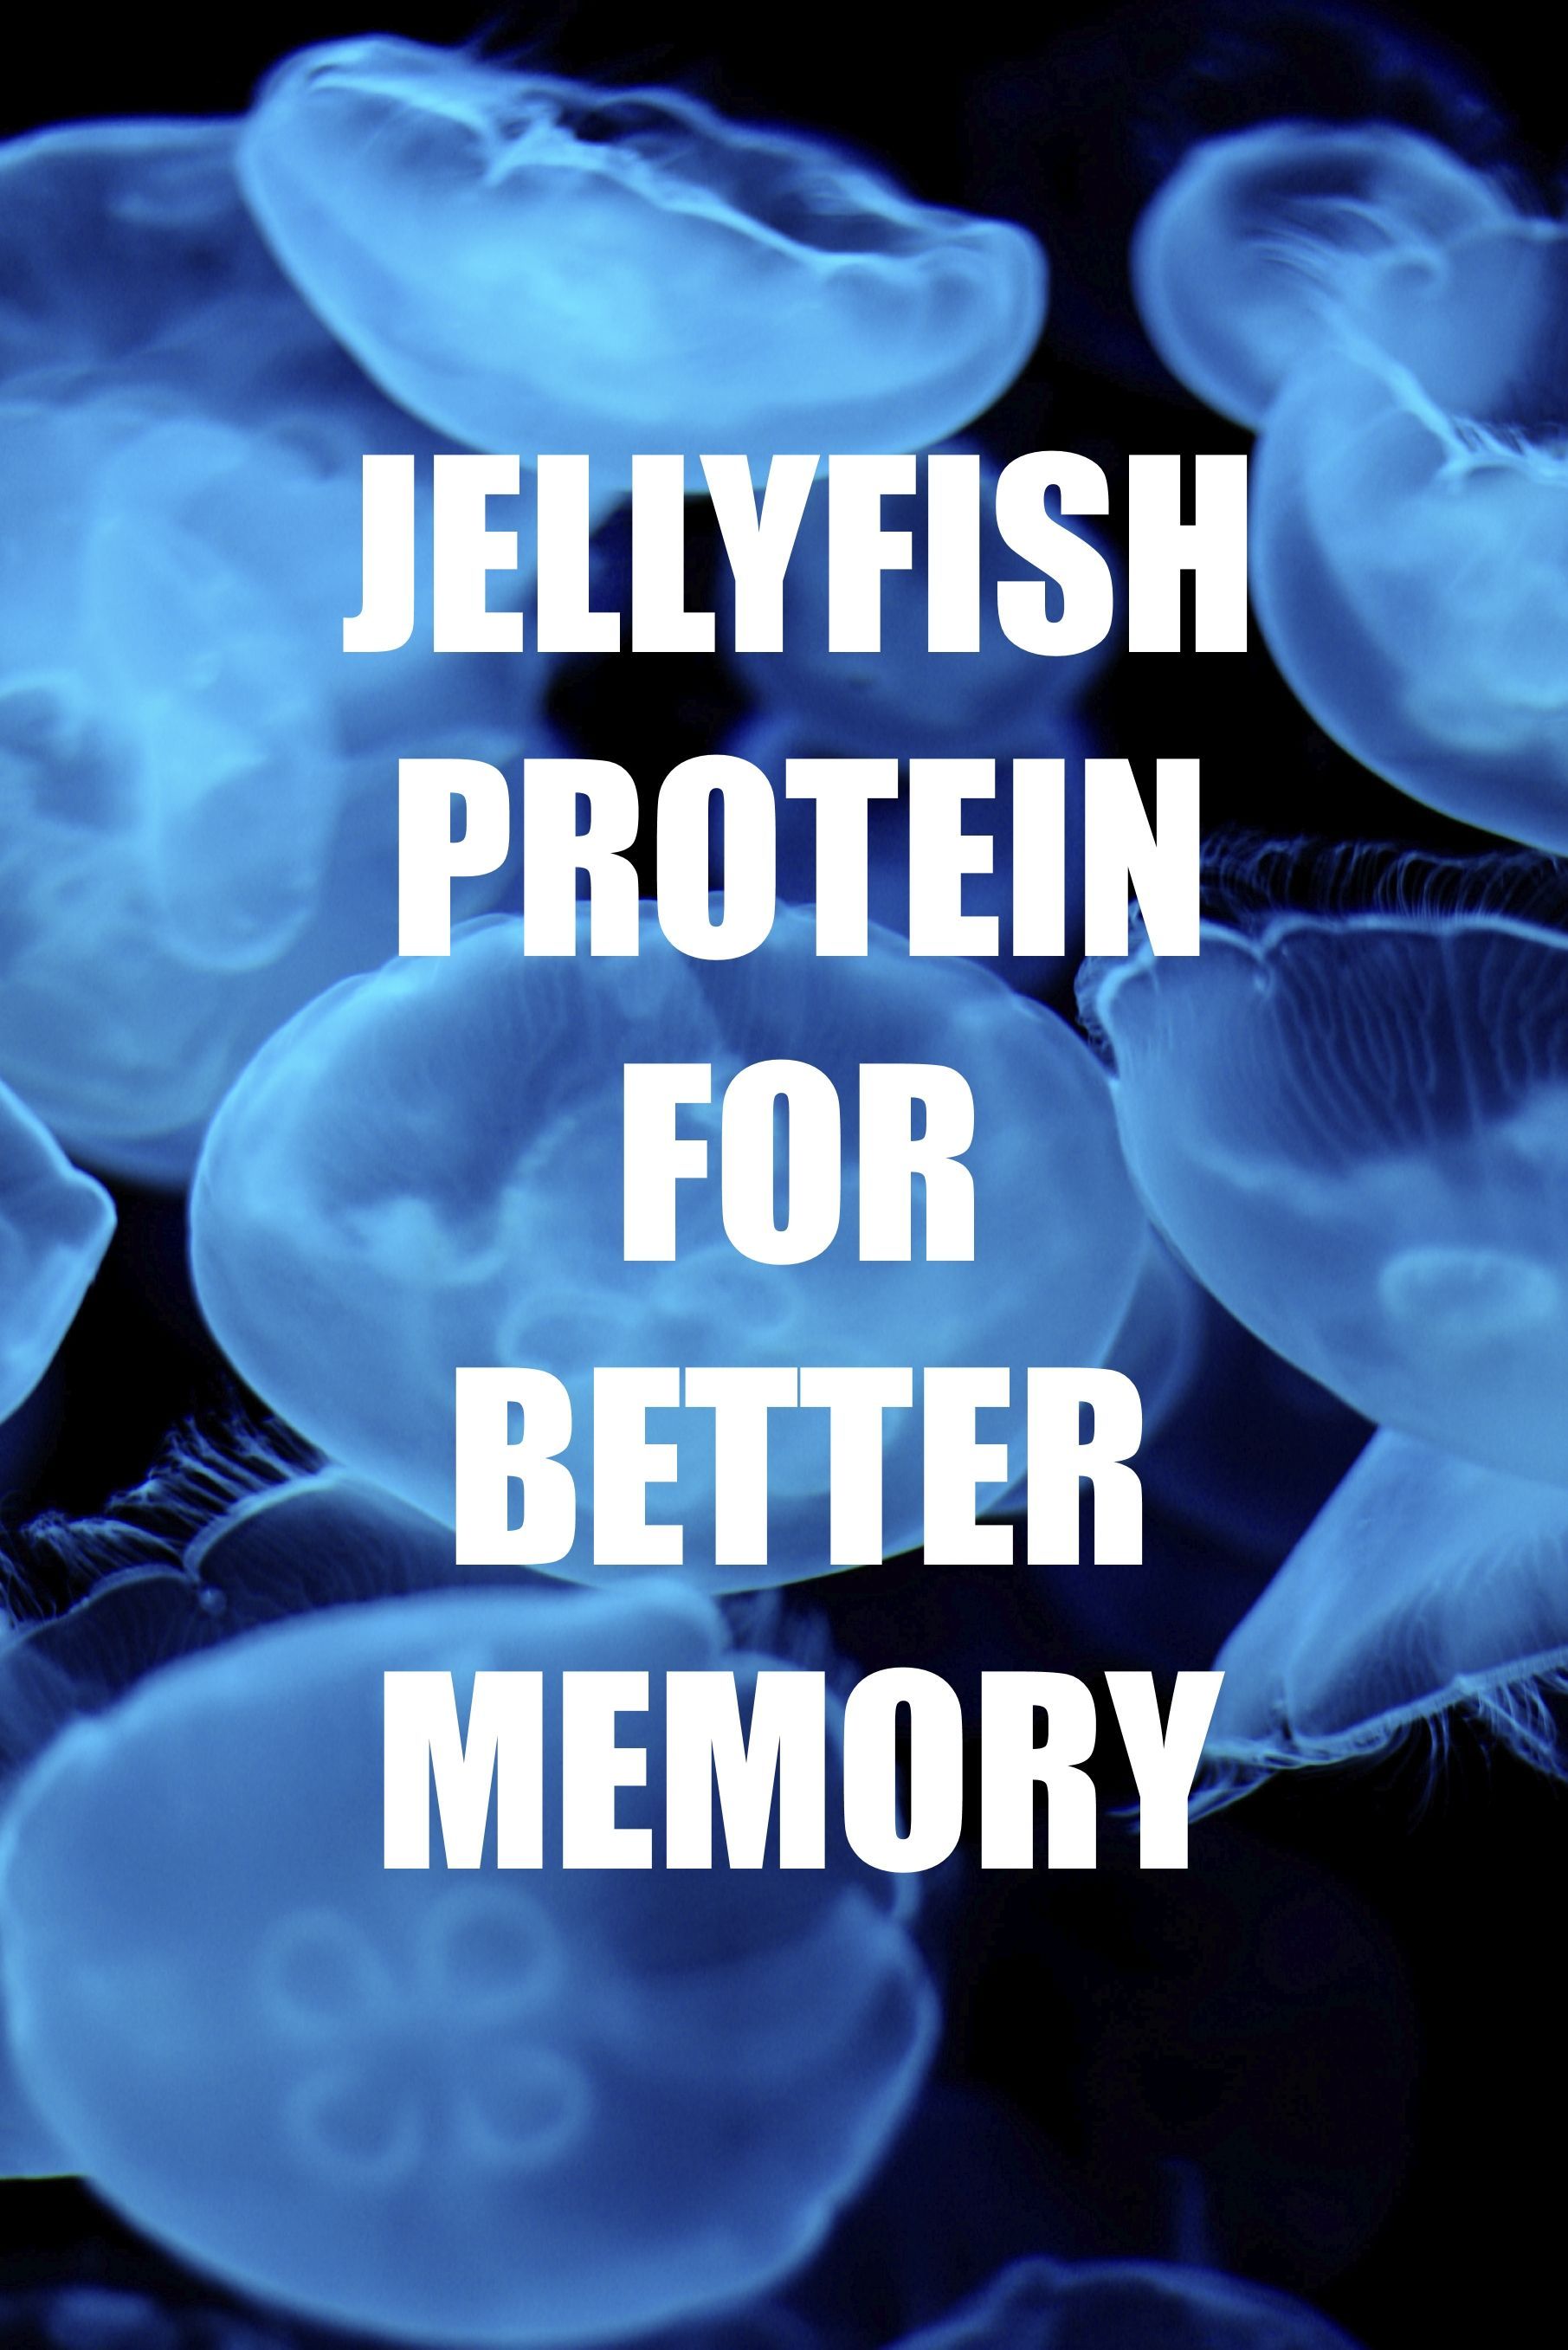 Can a protein from a jellyfish improve your memory? Scientists say YES. Discover